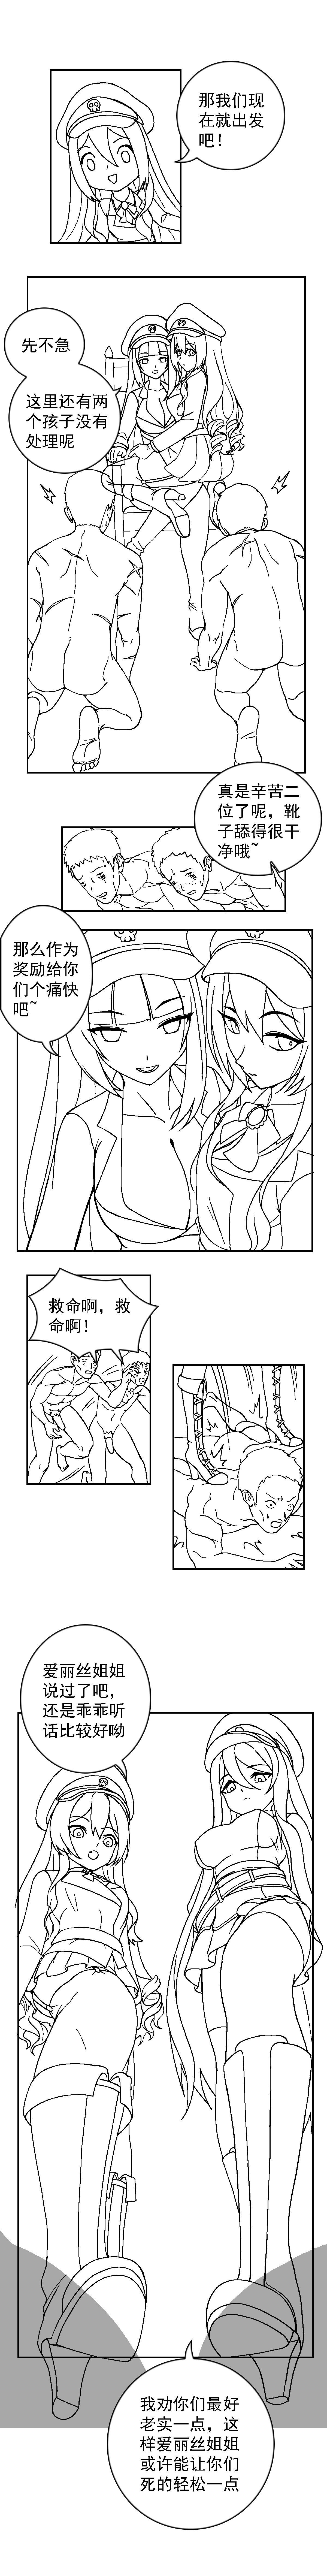 Amateur Sex [Weixiefashi] The Cruel Empire Executioners black-and-white [帝国处刑官爱丽丝2：残酷的处刑天使][黑白] Barely 18 Porn - Page 5